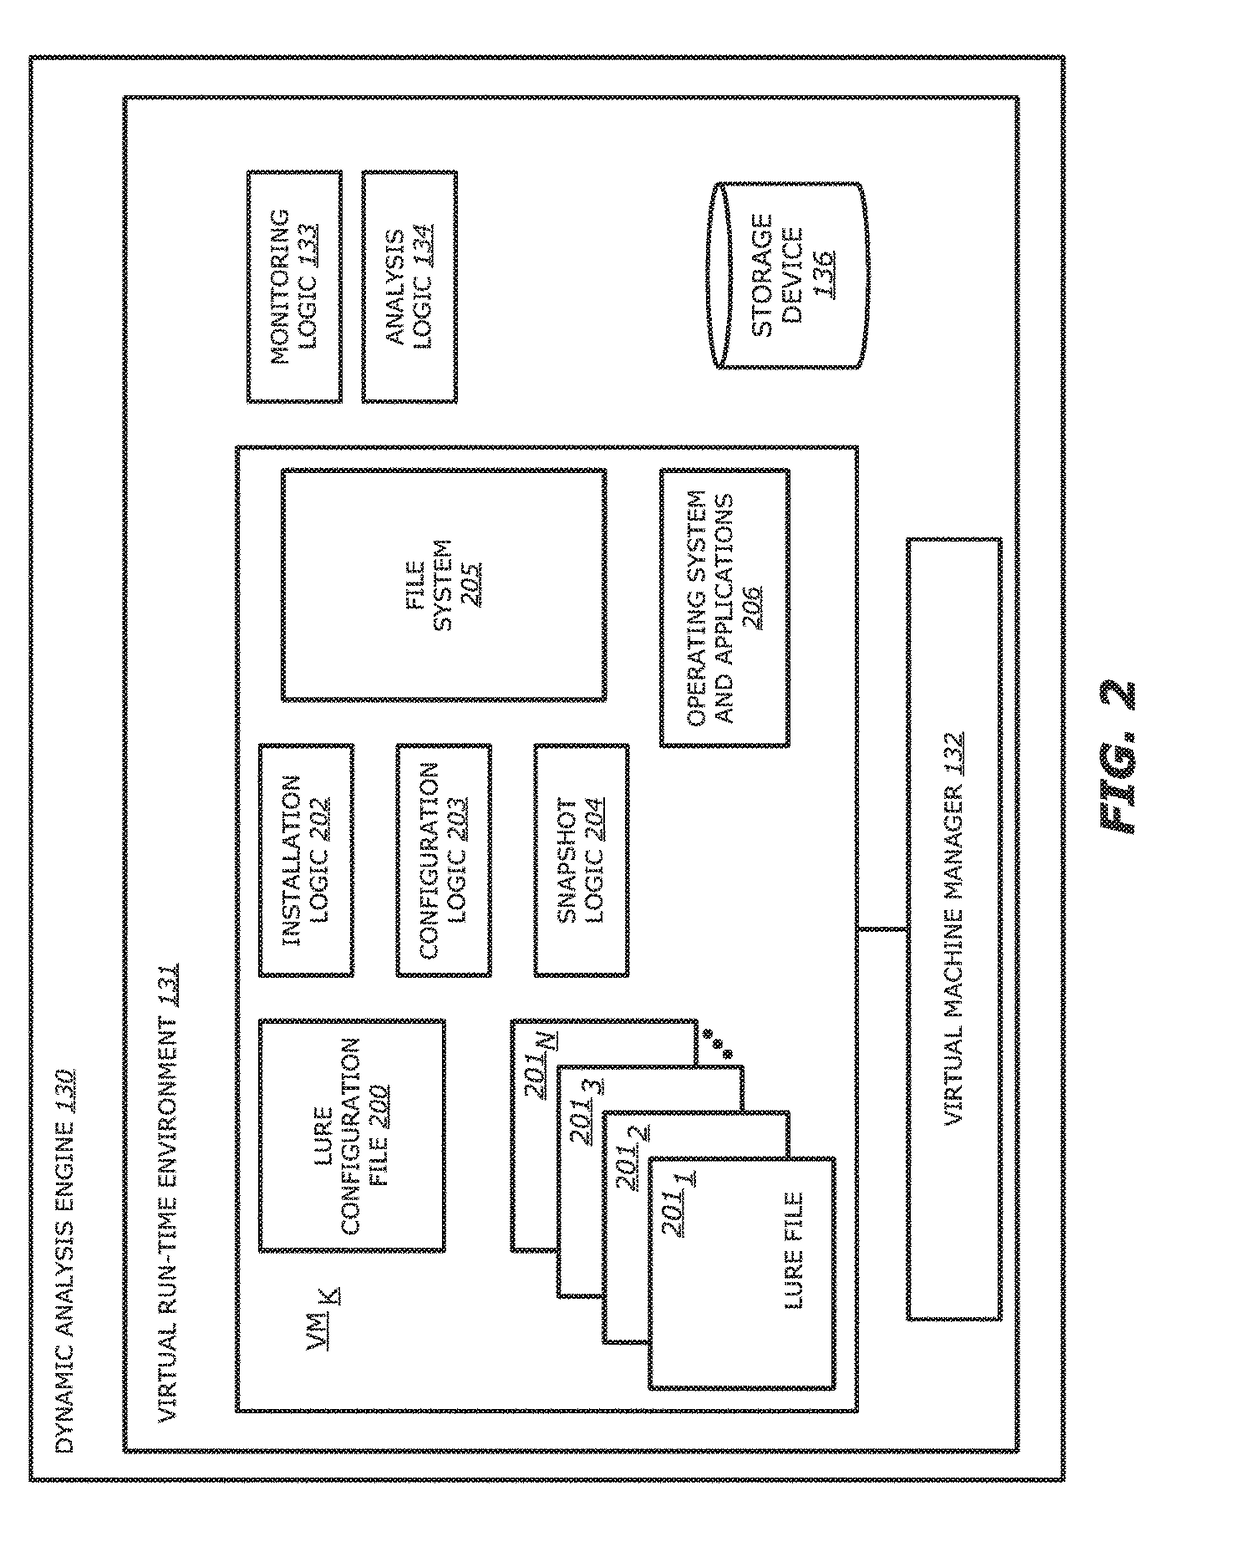 System and method for detecting file altering behaviors pertaining to a malicious attack